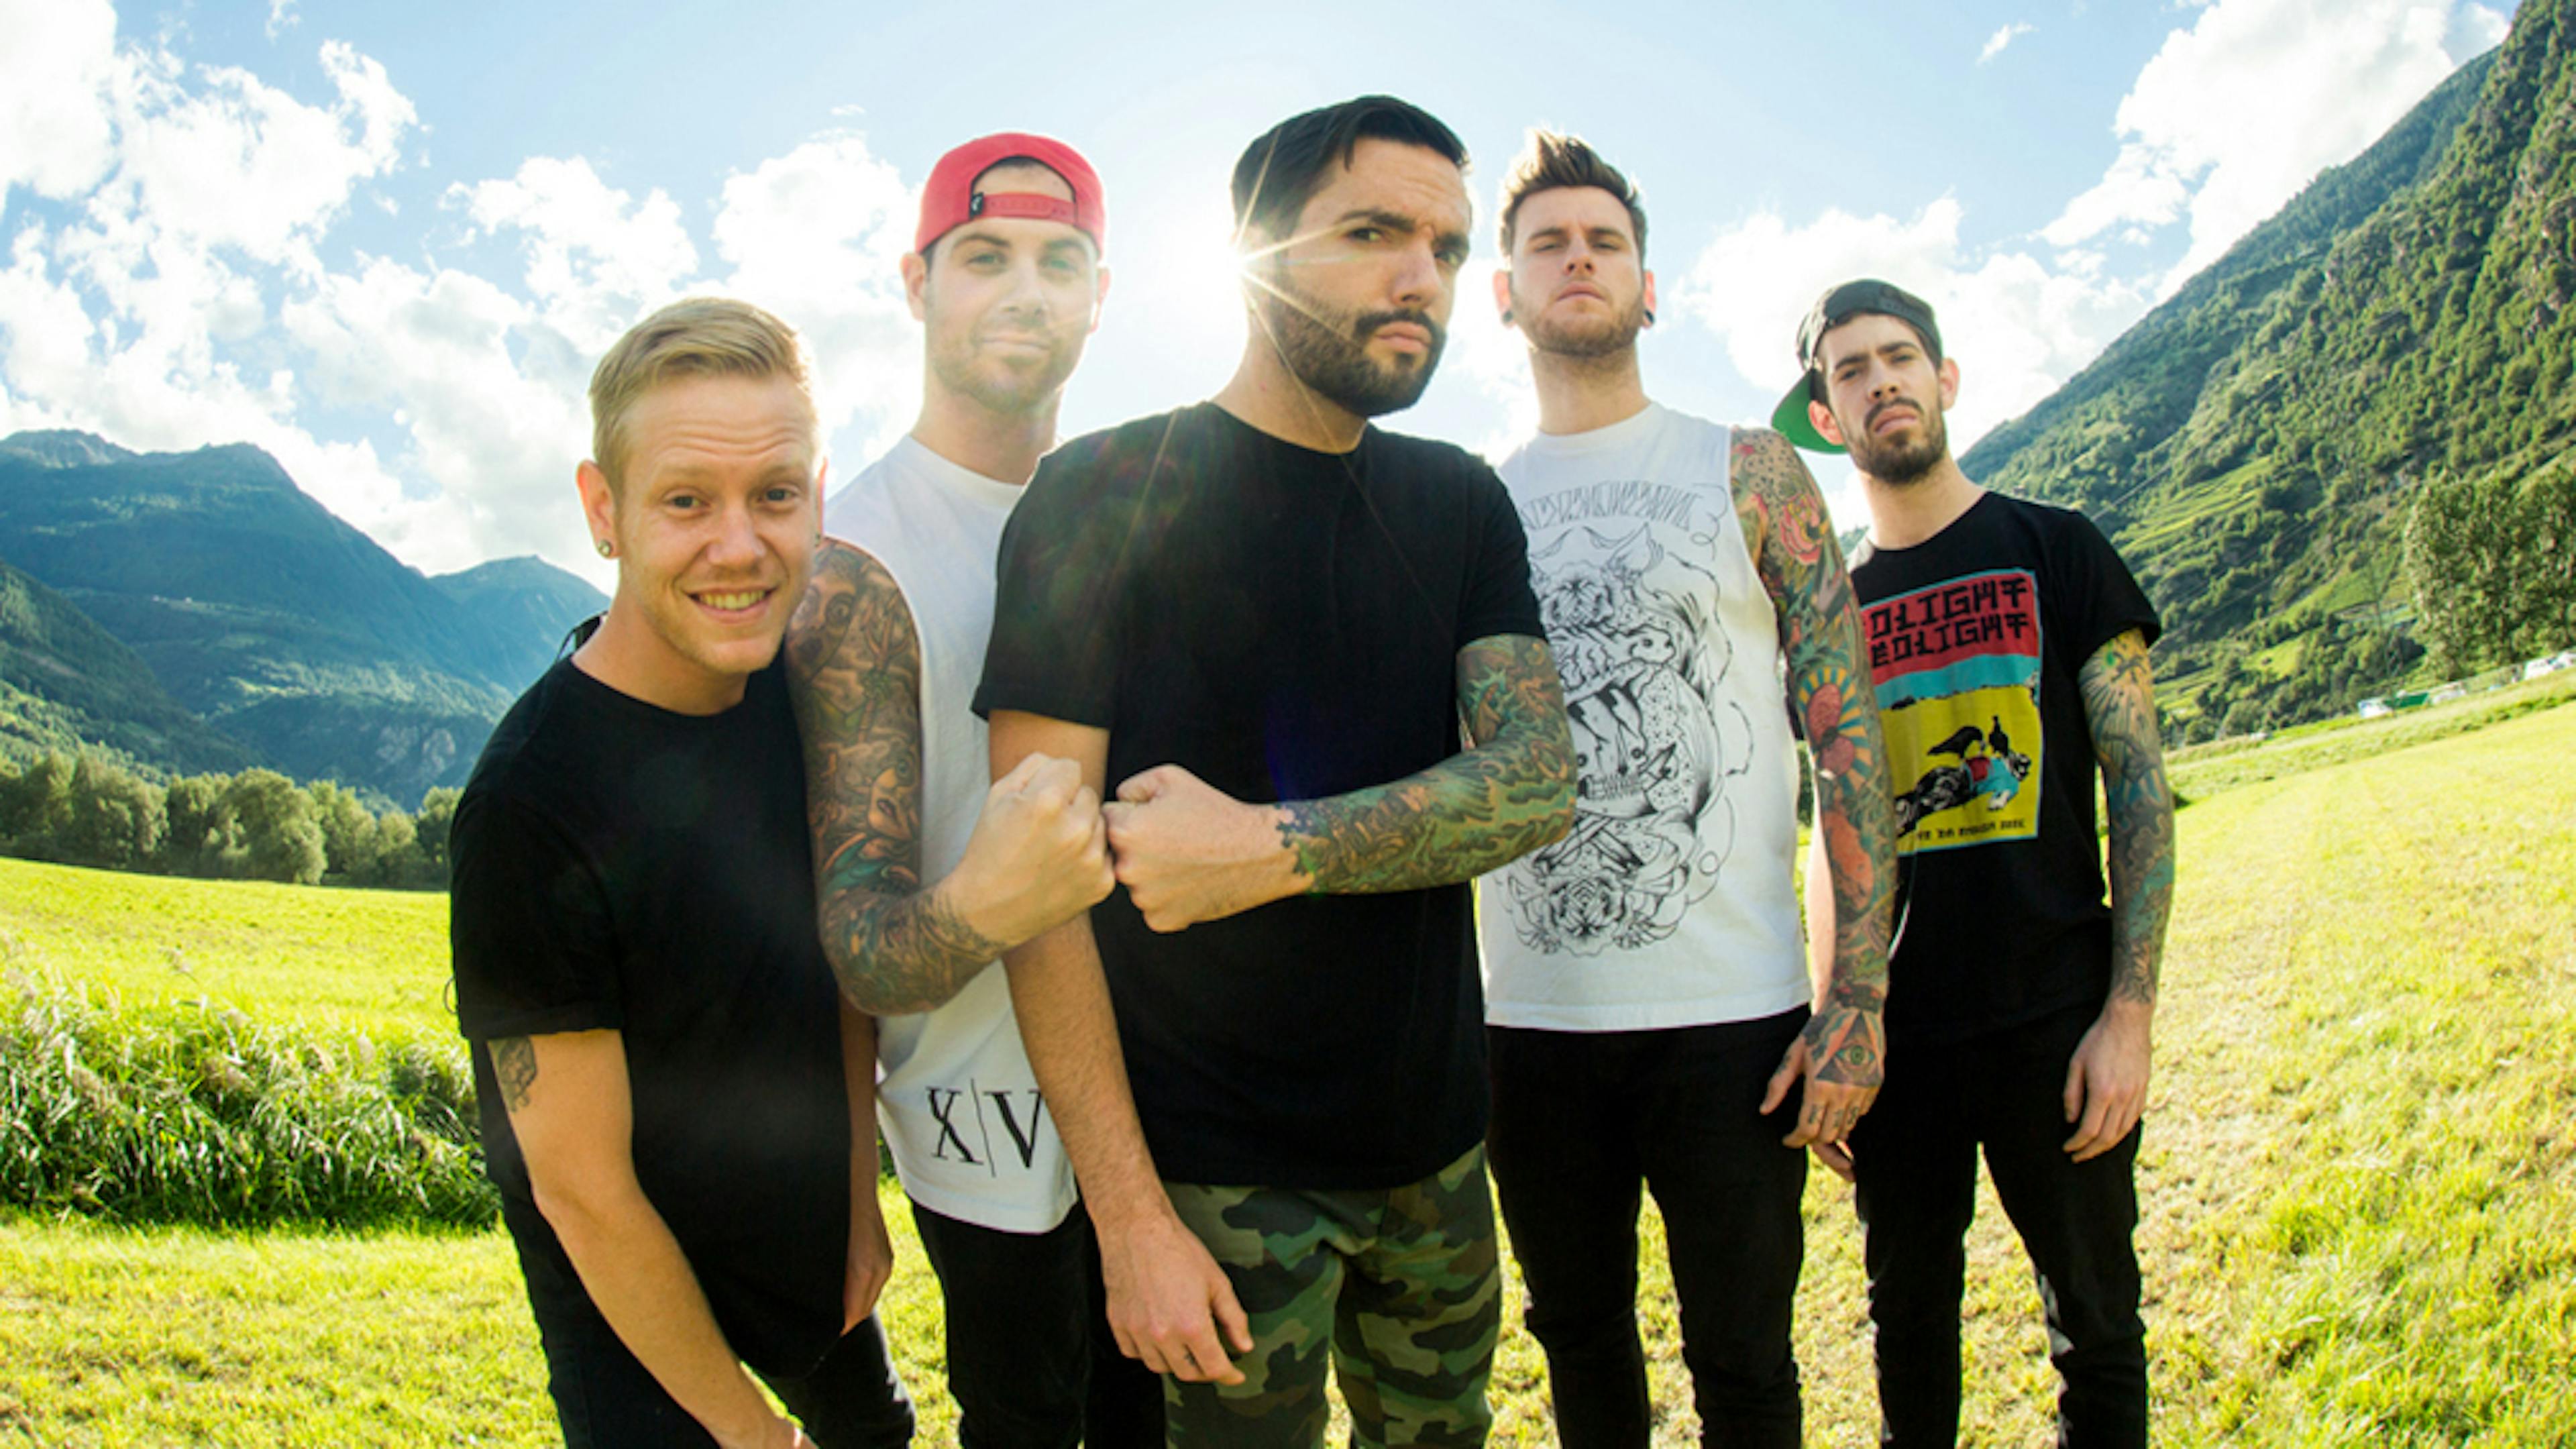 Here's An Amazing Saxophone Cover Of A Day To Remember’s If It Means A Lot To You